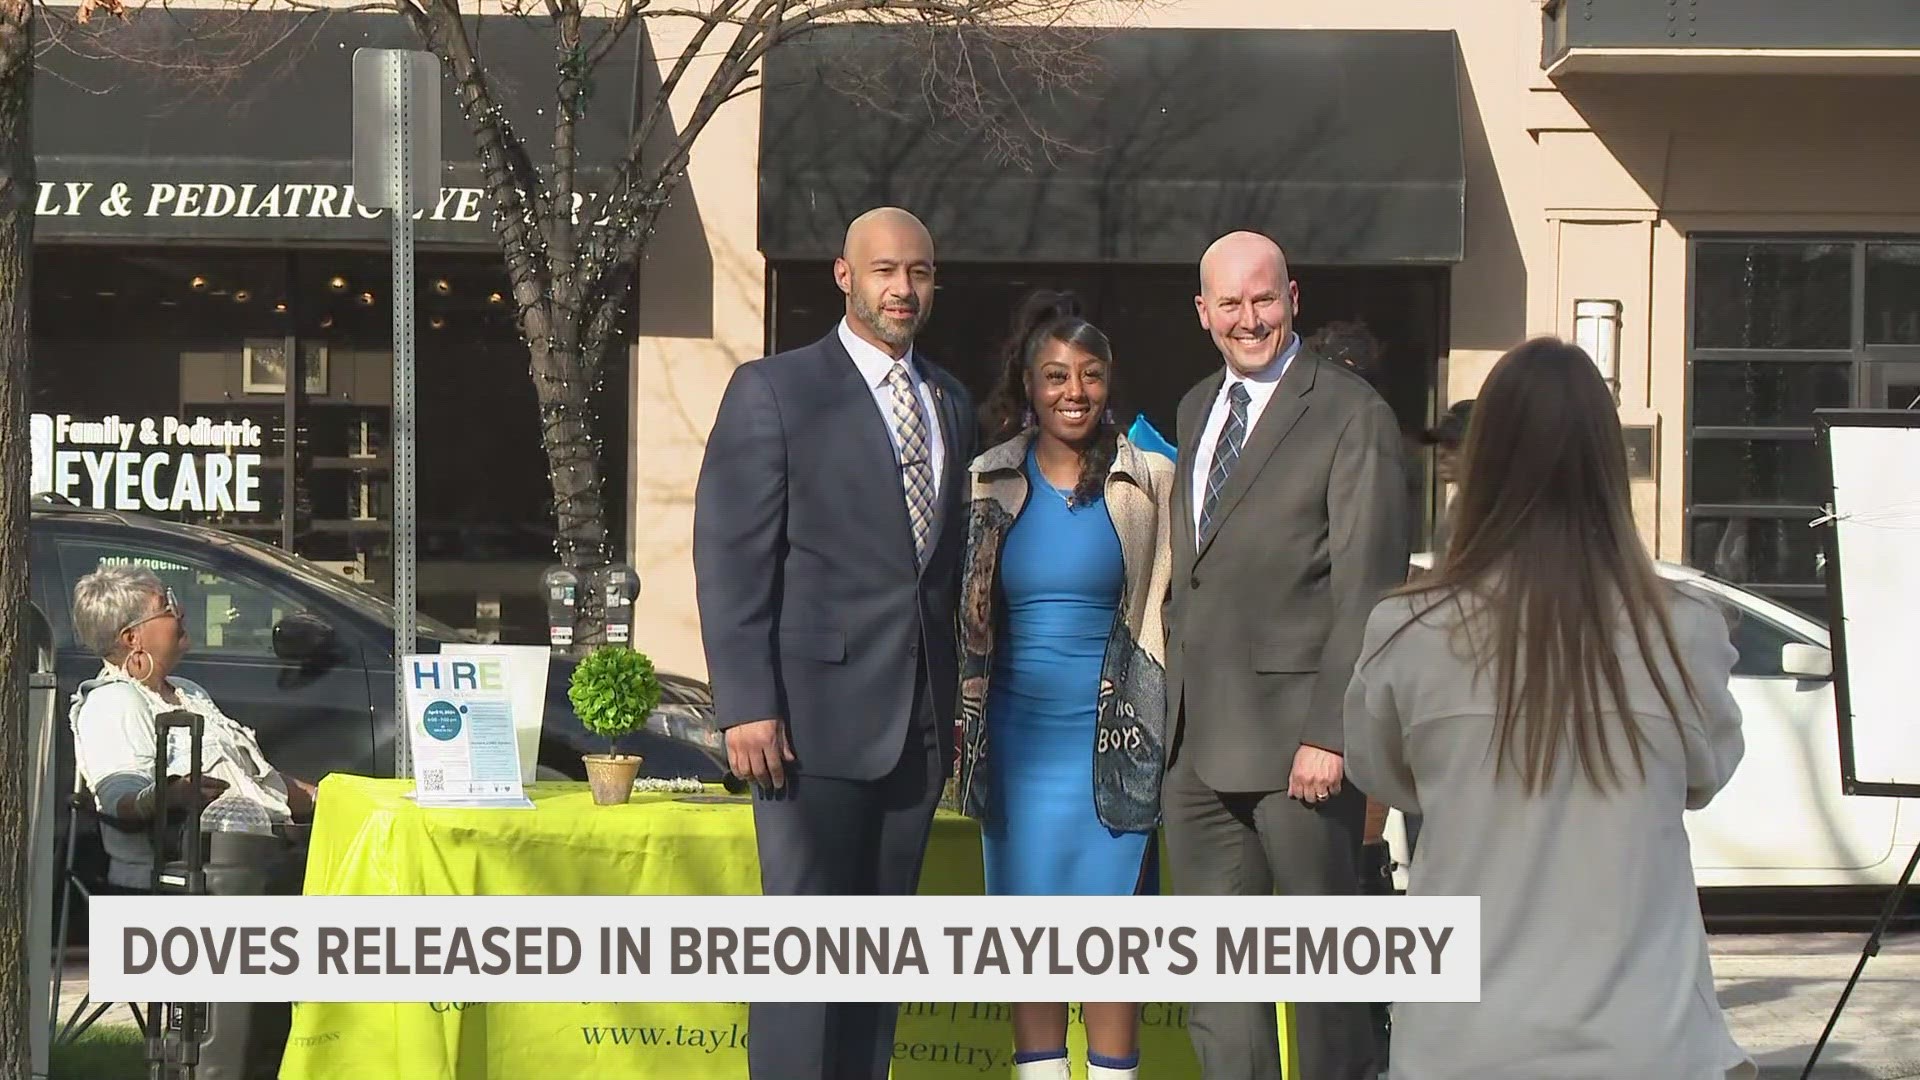 Breonna Taylor's family honored her memory by releasing doves in downtown Grand Rapids.